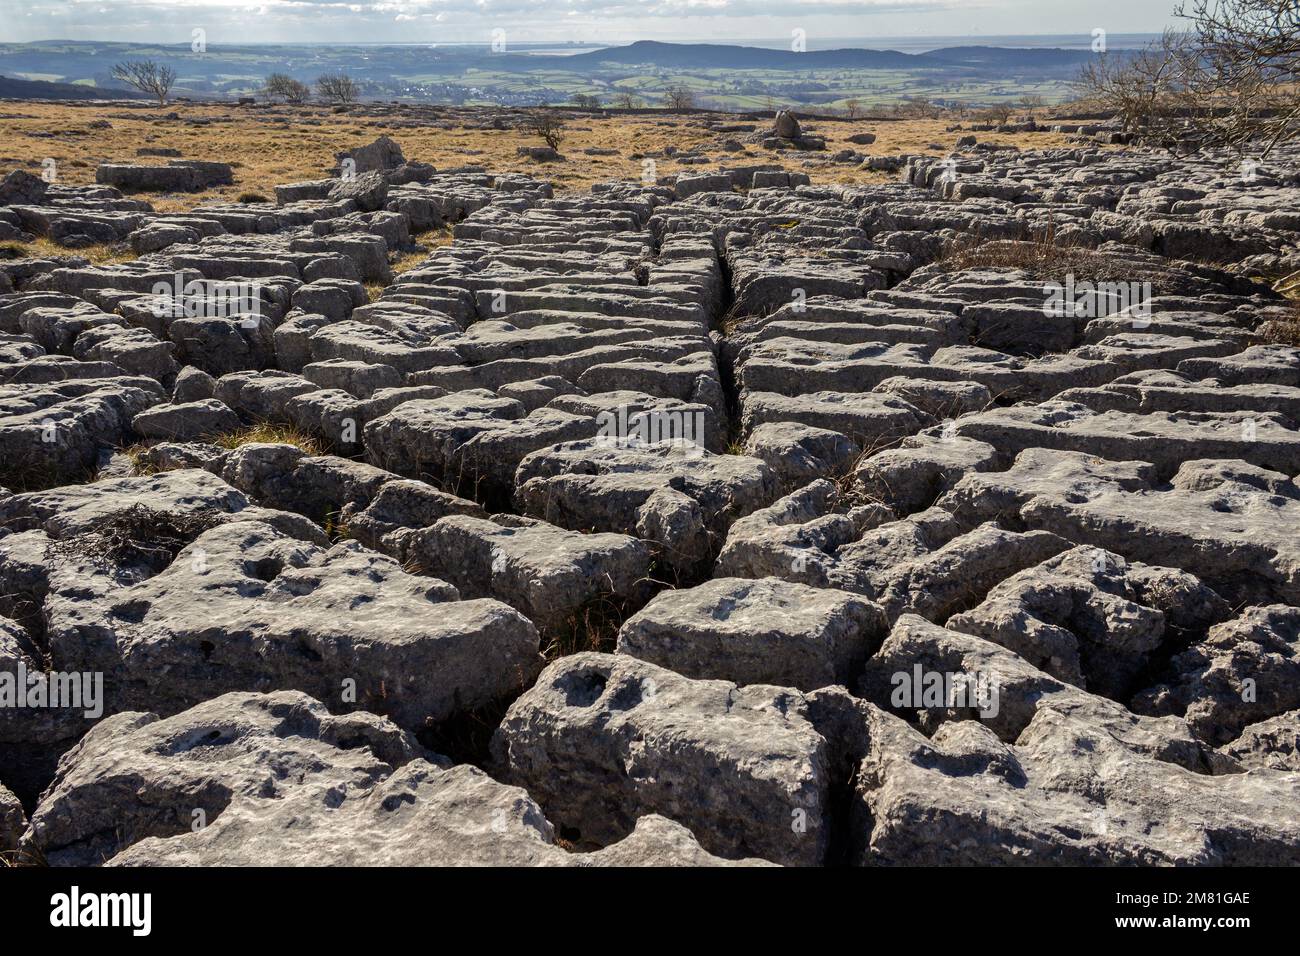 Hutton Roof, UK: Newbiggin Crags limestone pavement, Farleton Fell. Dramatic weathered rock formation created during the ice age. Stock Photo